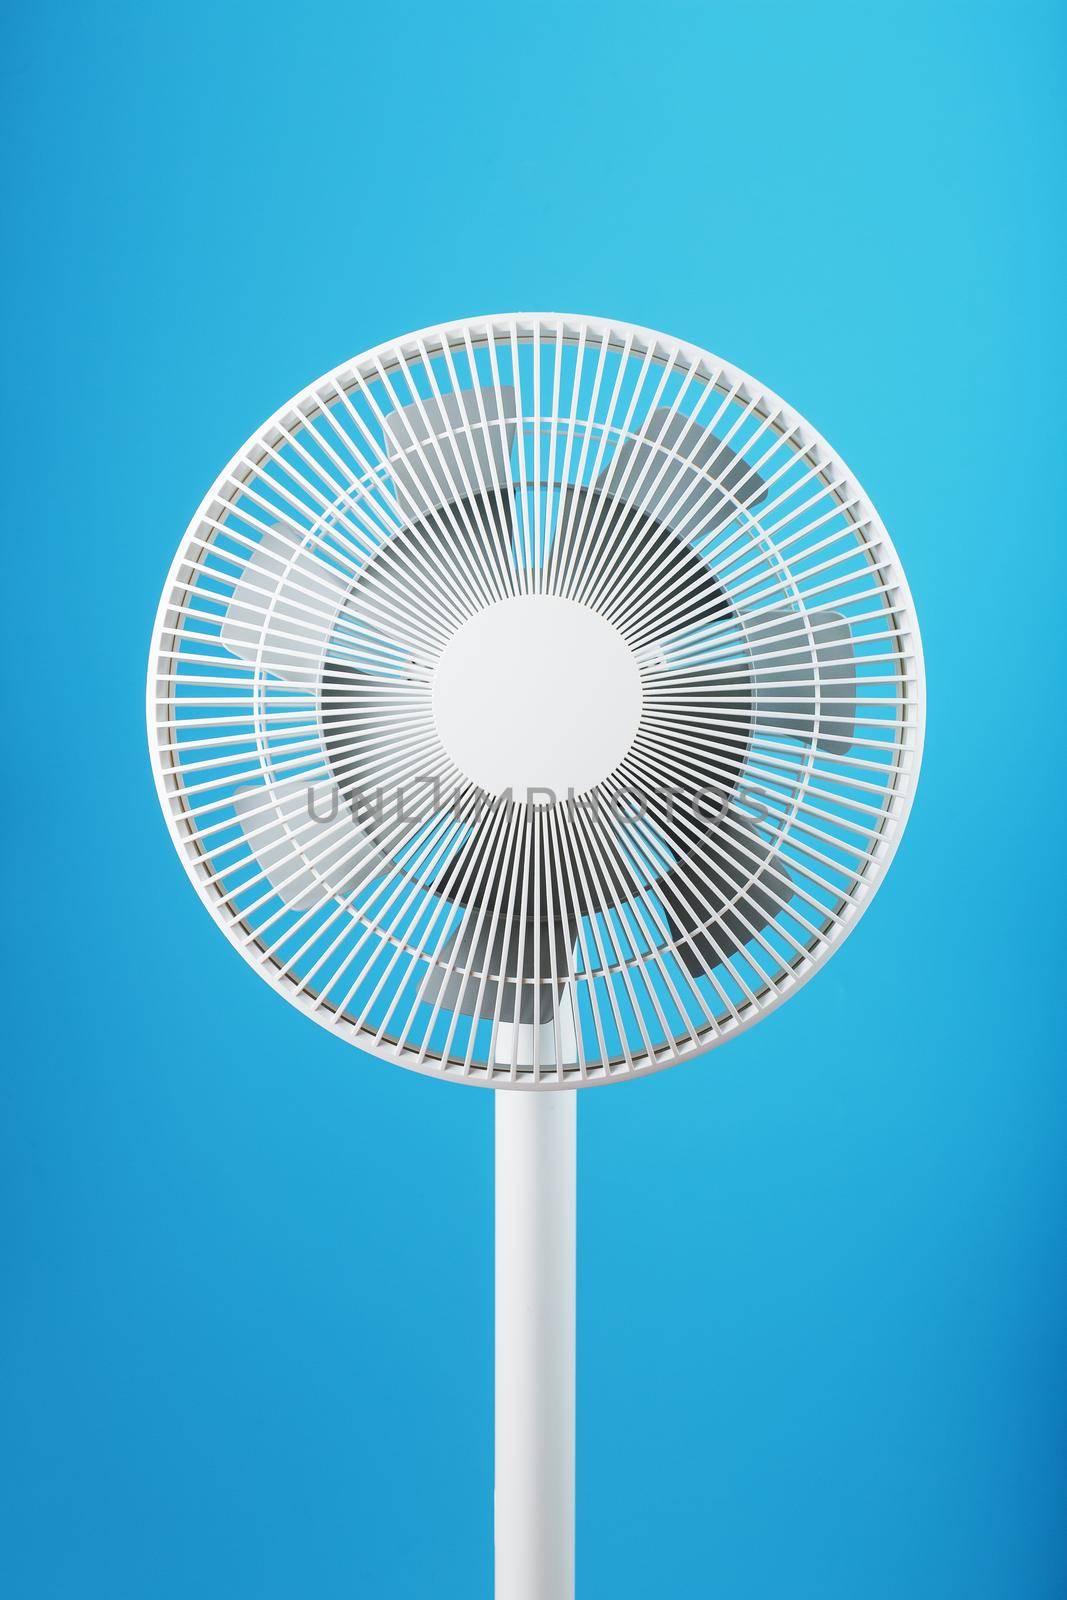 The grille and blades of the electric fan are white on a blue background. Minimalistic style, close-up